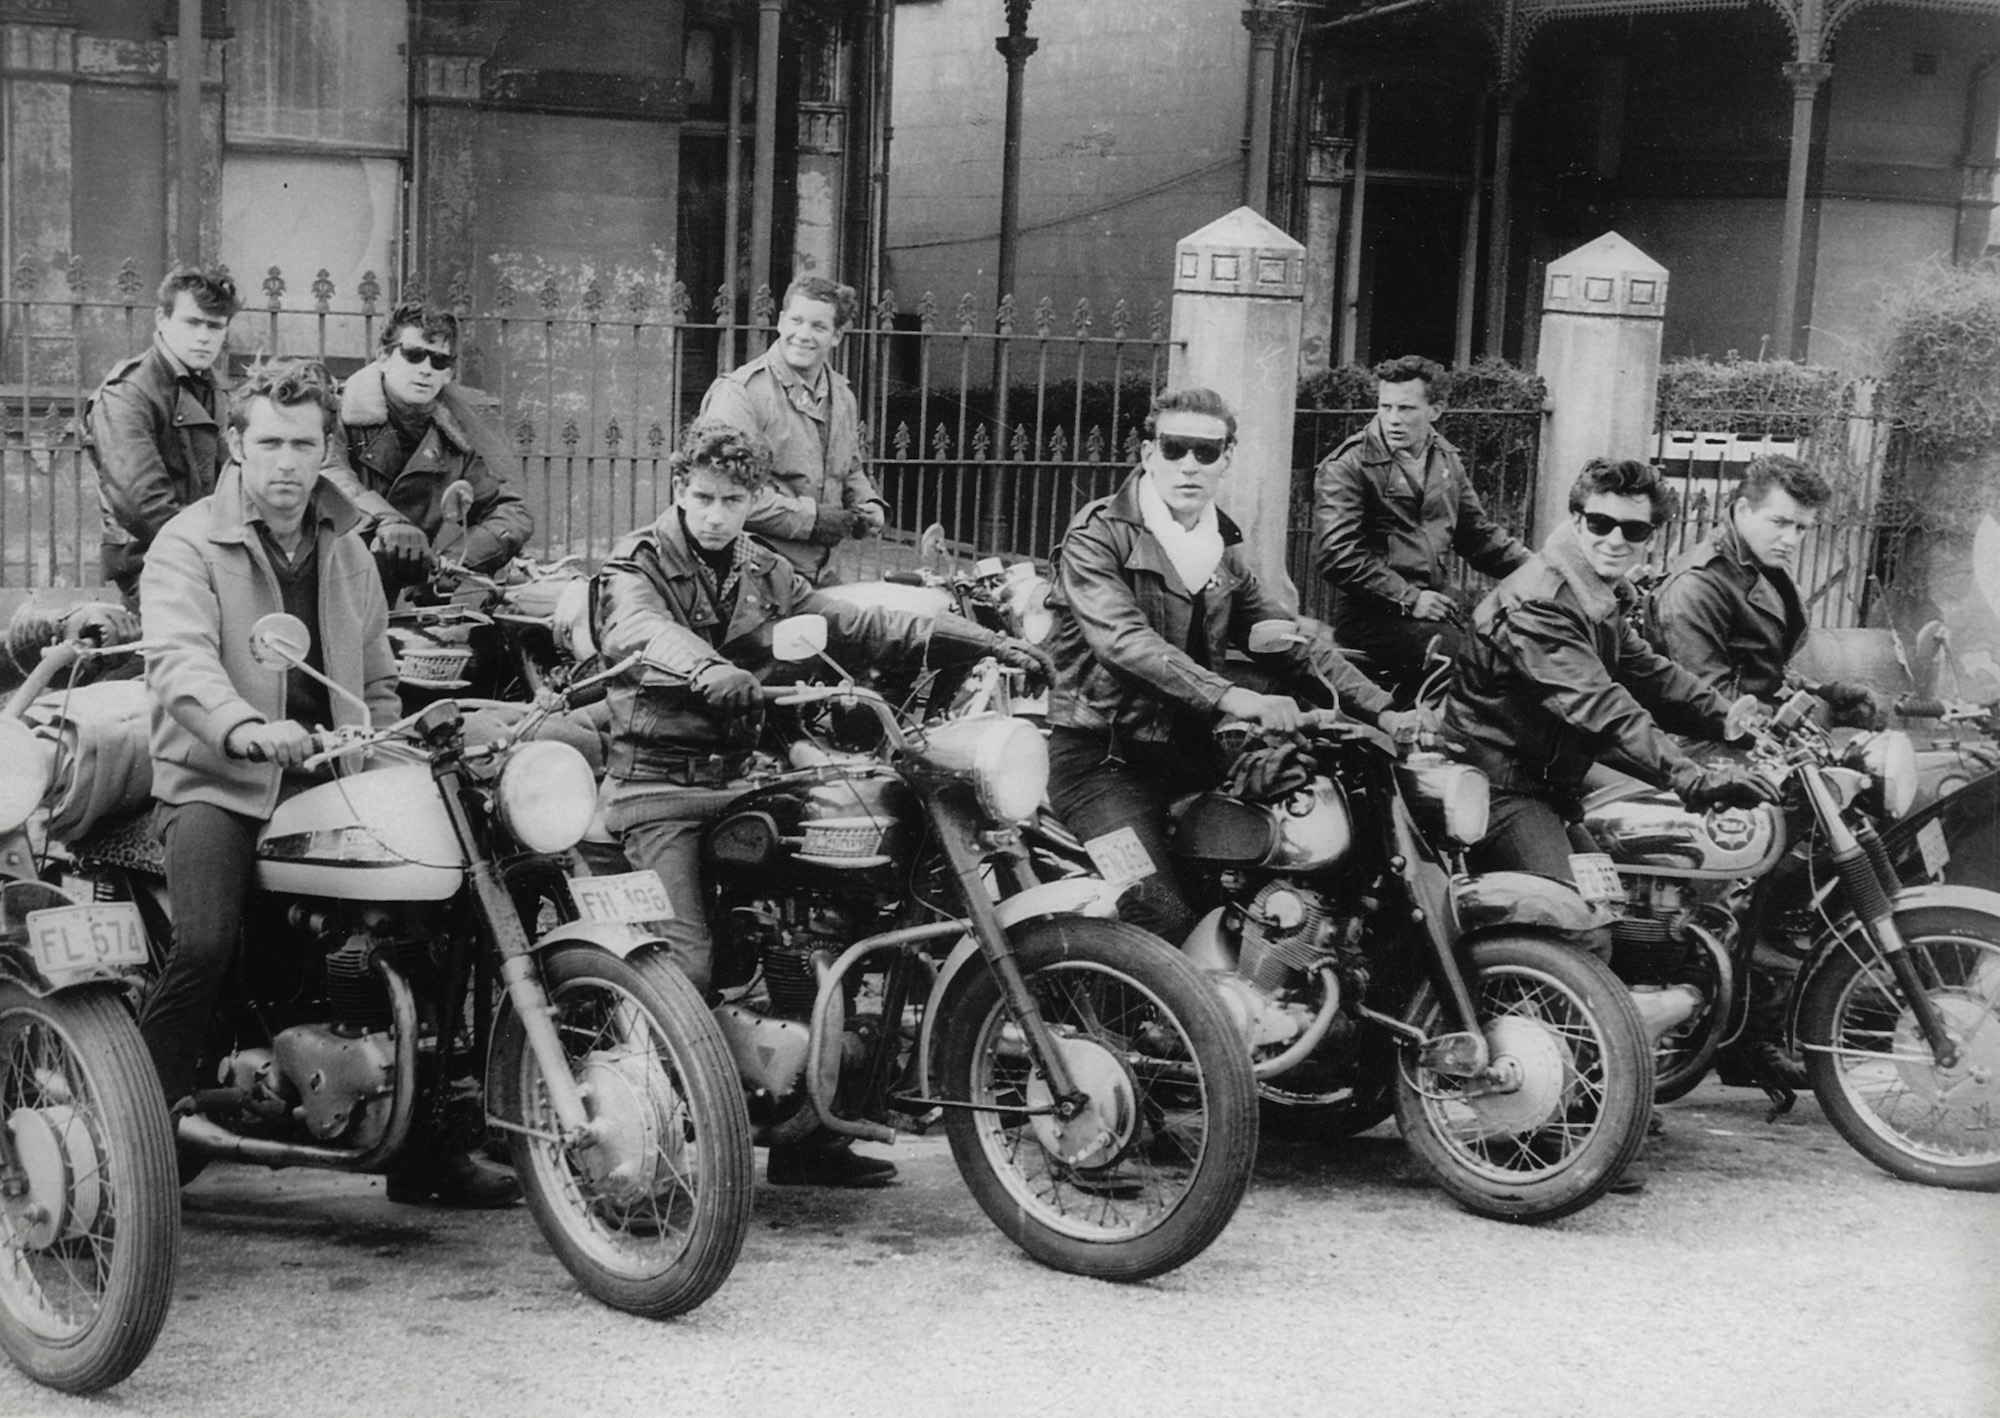 My father is the middle-most biker with the somewhat ill-fitting sunglasses, and the photo was taken in 1961 in Newcastle, NSW, Australia. Dad was seventeen at the time and had run away from home. He joined a traveling carnival, ended up working in a circus, then took up with a group of bikers. I think these were the Devil's Dozen. From memory, that leather jacket was stolen and it was the police that discovered this who sent him back on his way home to Bathurst, NSW. View full size.